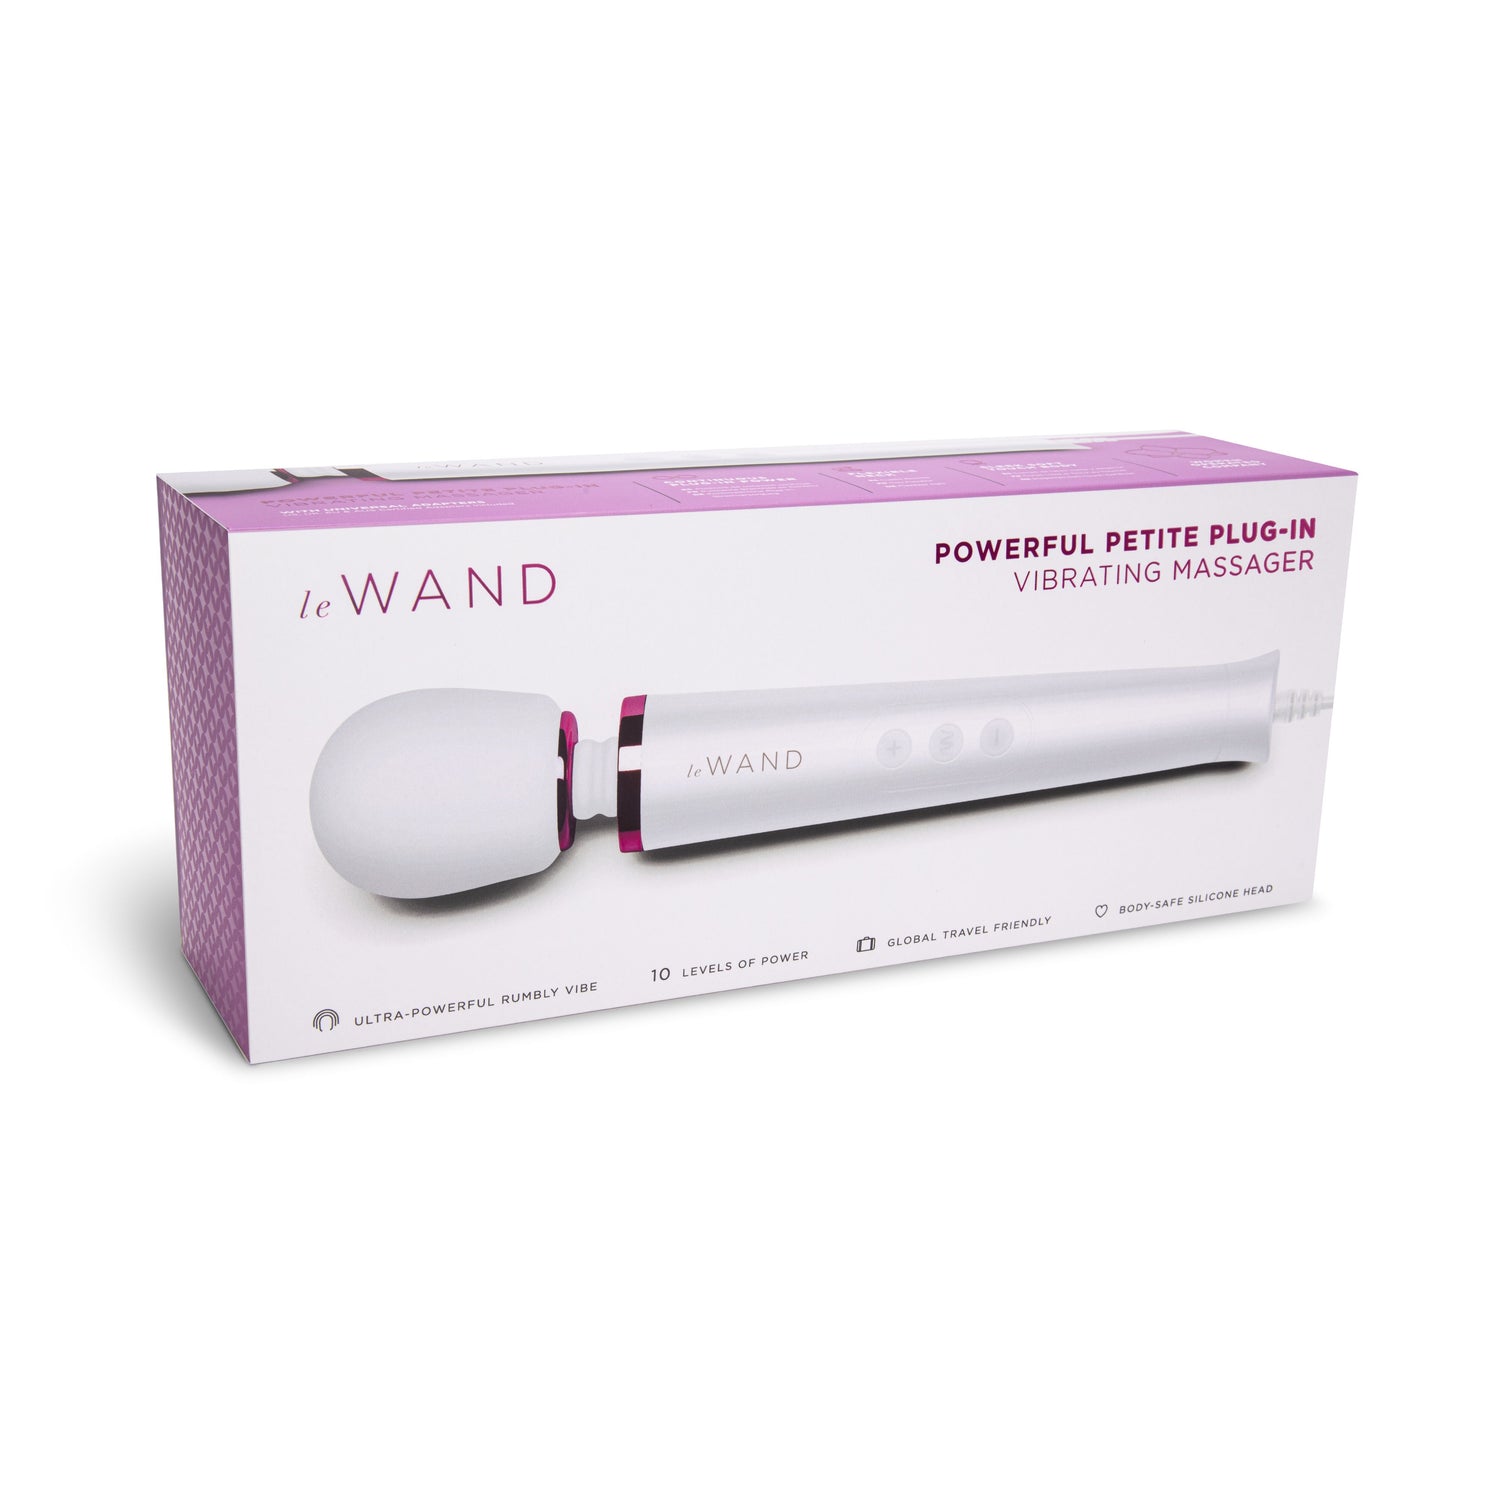 Le Wand Powerful Petite Plug-In - White*